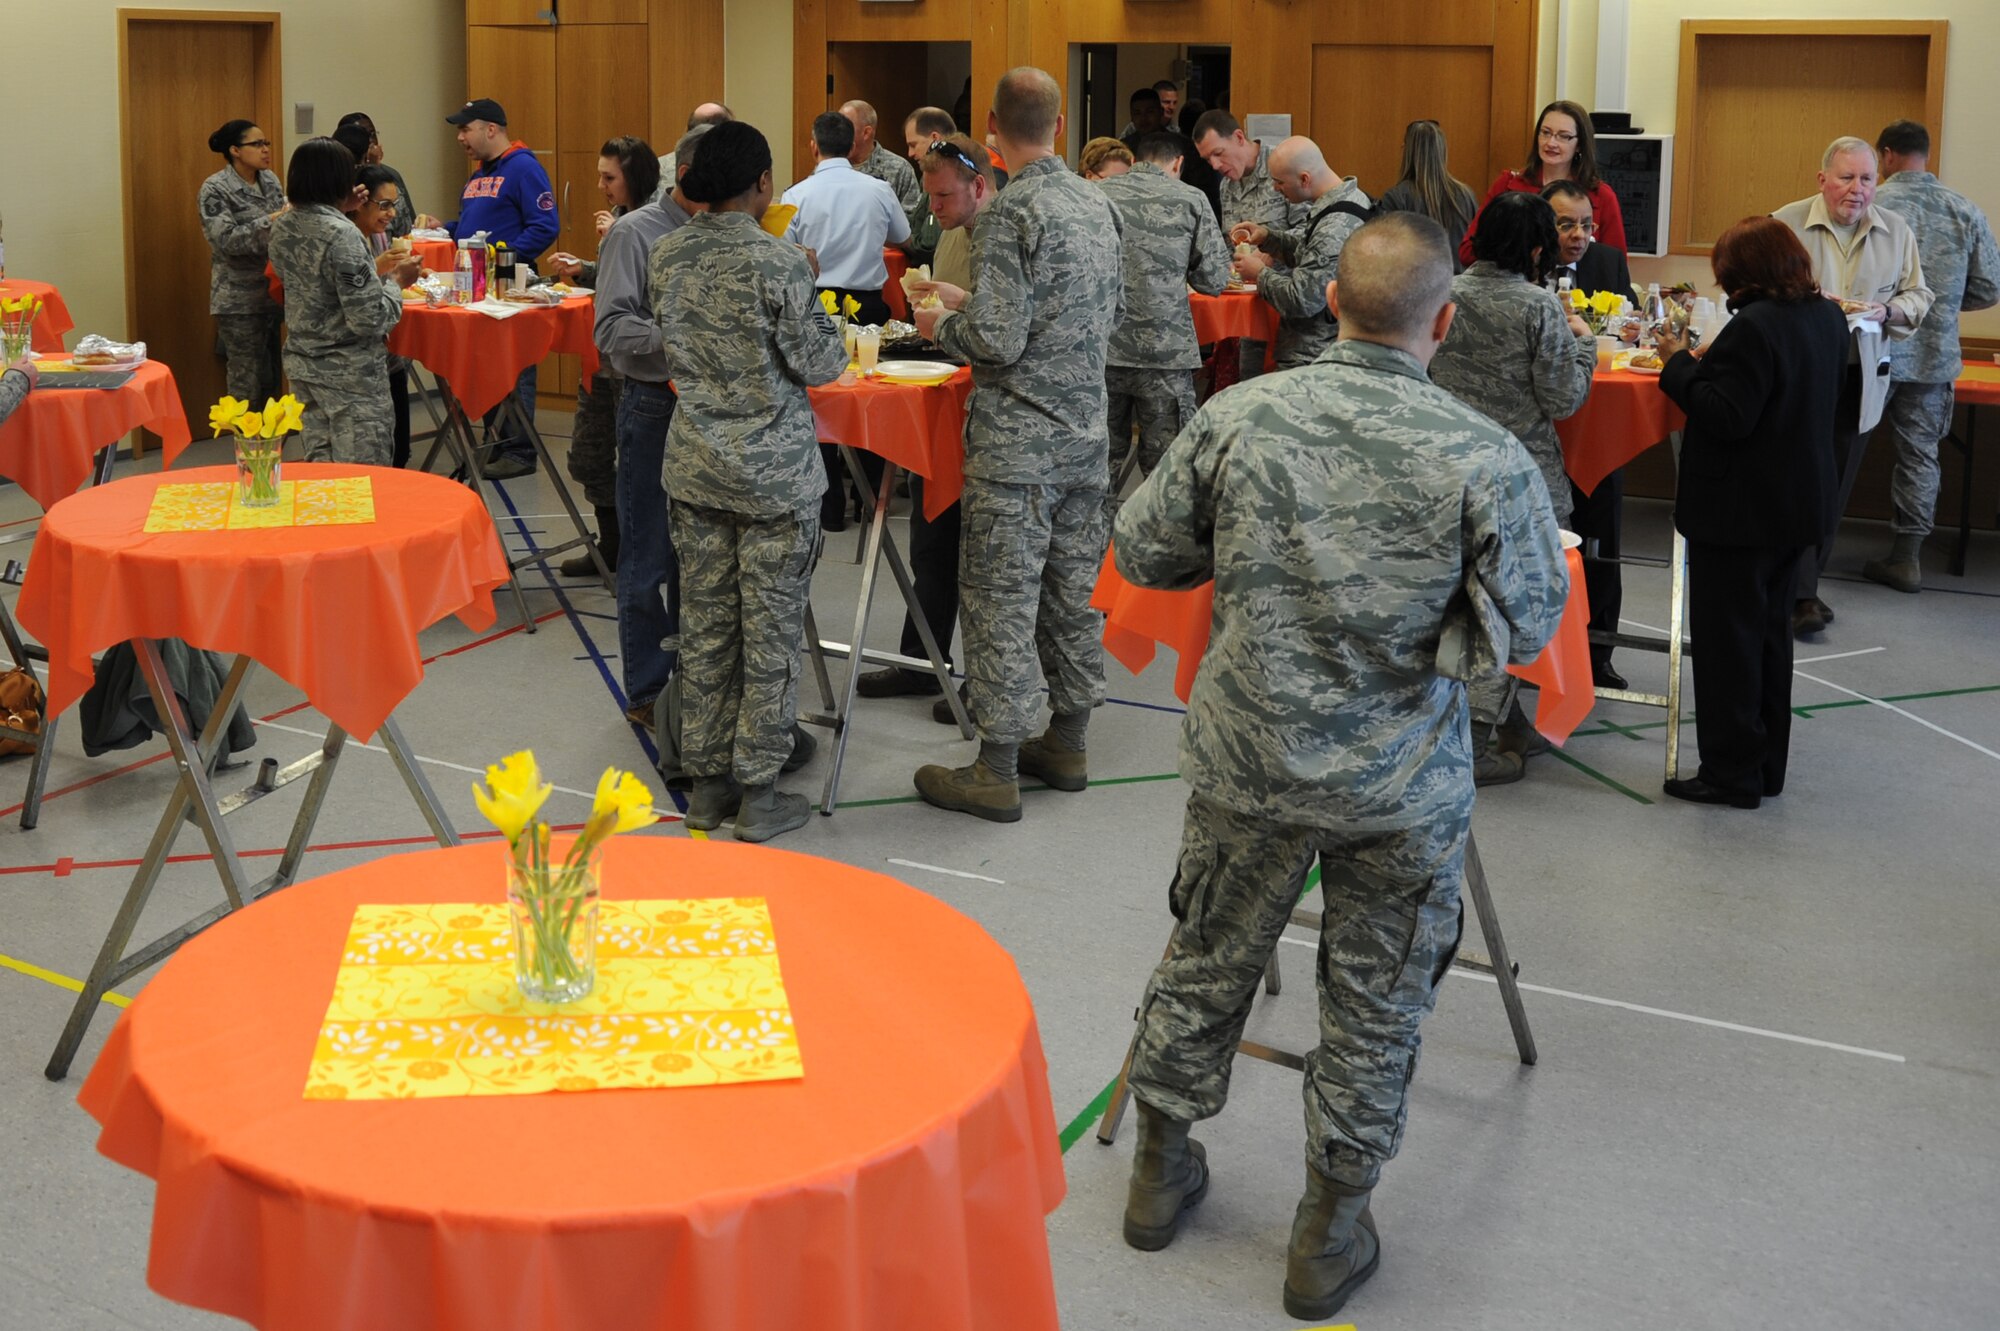 Spangdahlem community members have breakfast during the Spangdahlem National Prayer Breakfast March 14, 2014, in the base chapel at Spangdahlem Air Base, Germany. The annual event originally started in 1953 as the Presidential Prayer Breakfast before organizers changed the name to the National Prayer Breakfast in 1970. (U.S. Air Force photo by Airman 1st Class Dylan Nuckolls/Released)